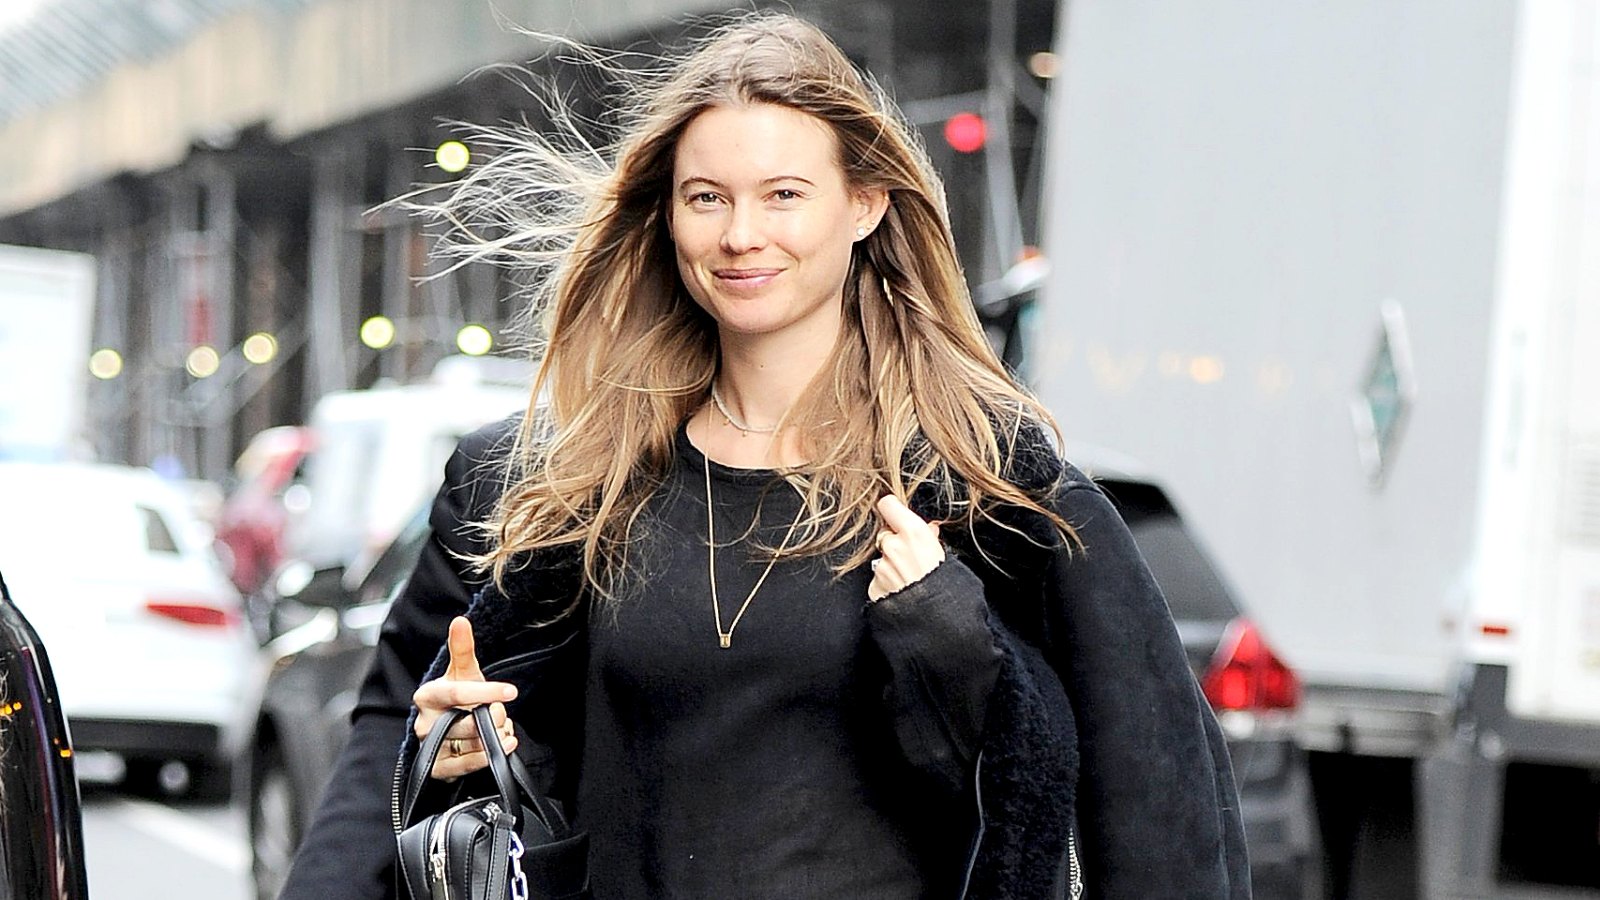 Behati Prinsloo is all smiles as she steps out to head to Dujour magazine event in NYC on March 23, 2016.